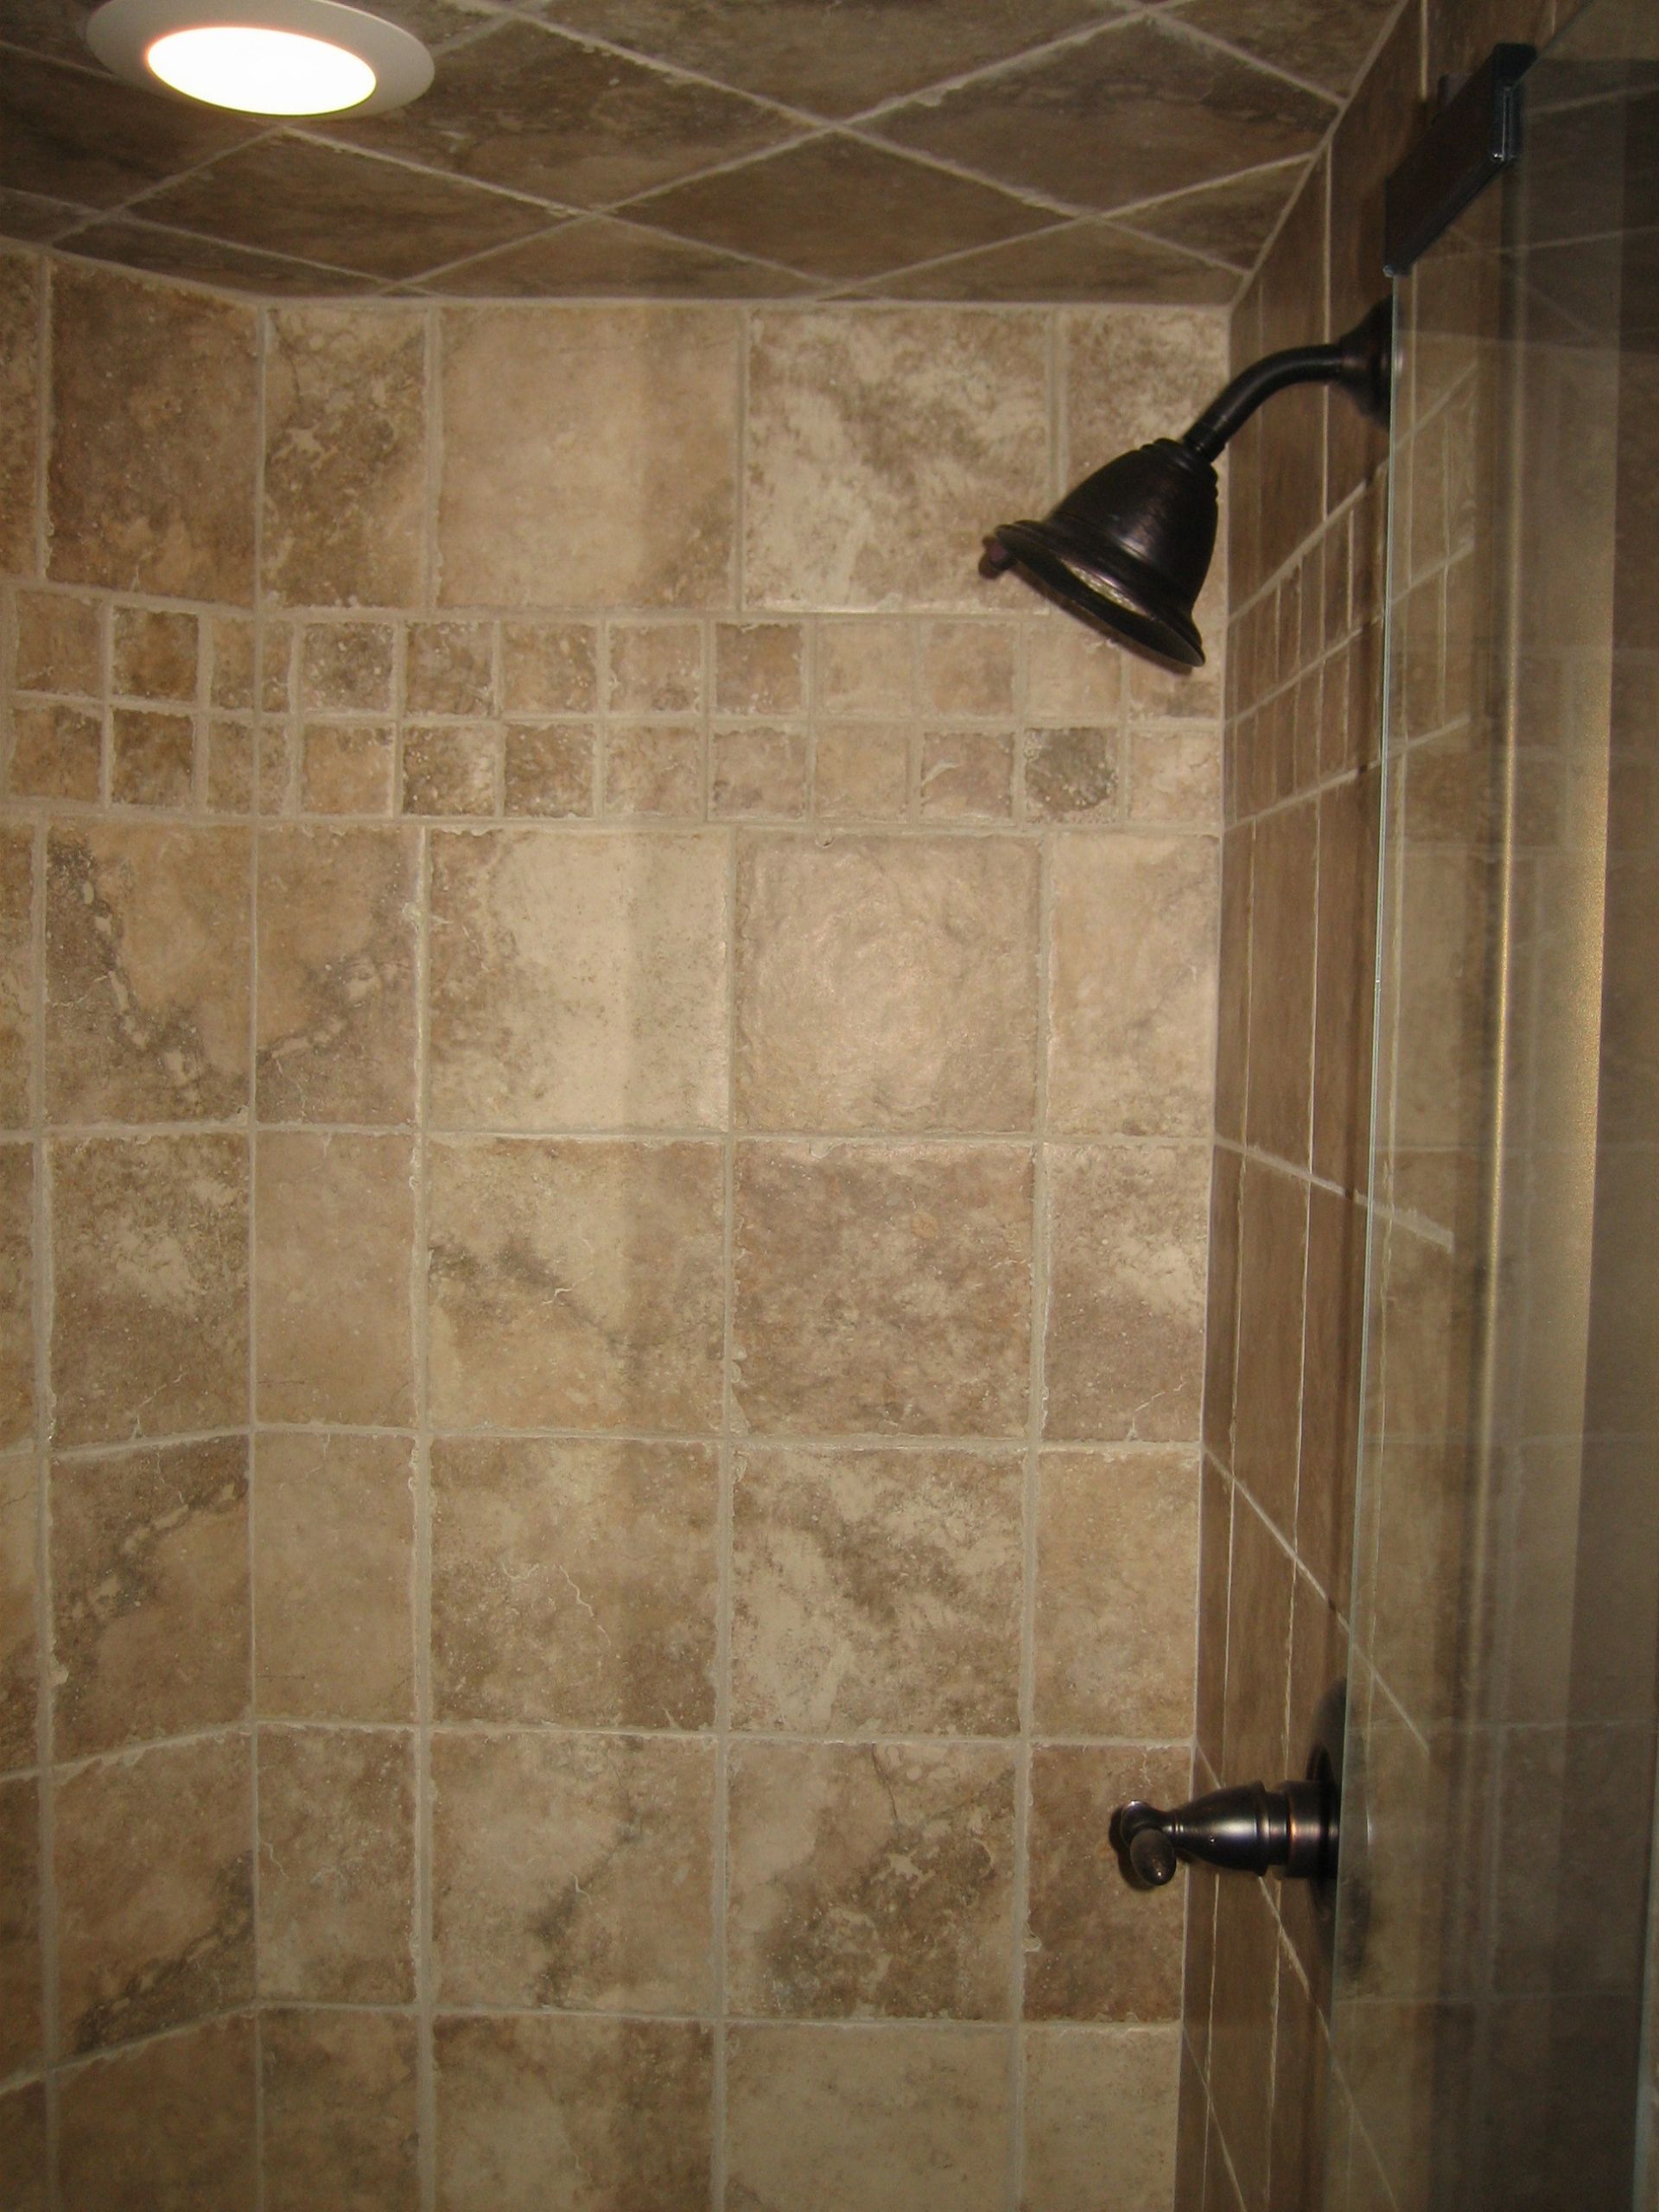 Bathroom Shower Inserts
 Shower with Band Insert Ceiling Tile 2 2008